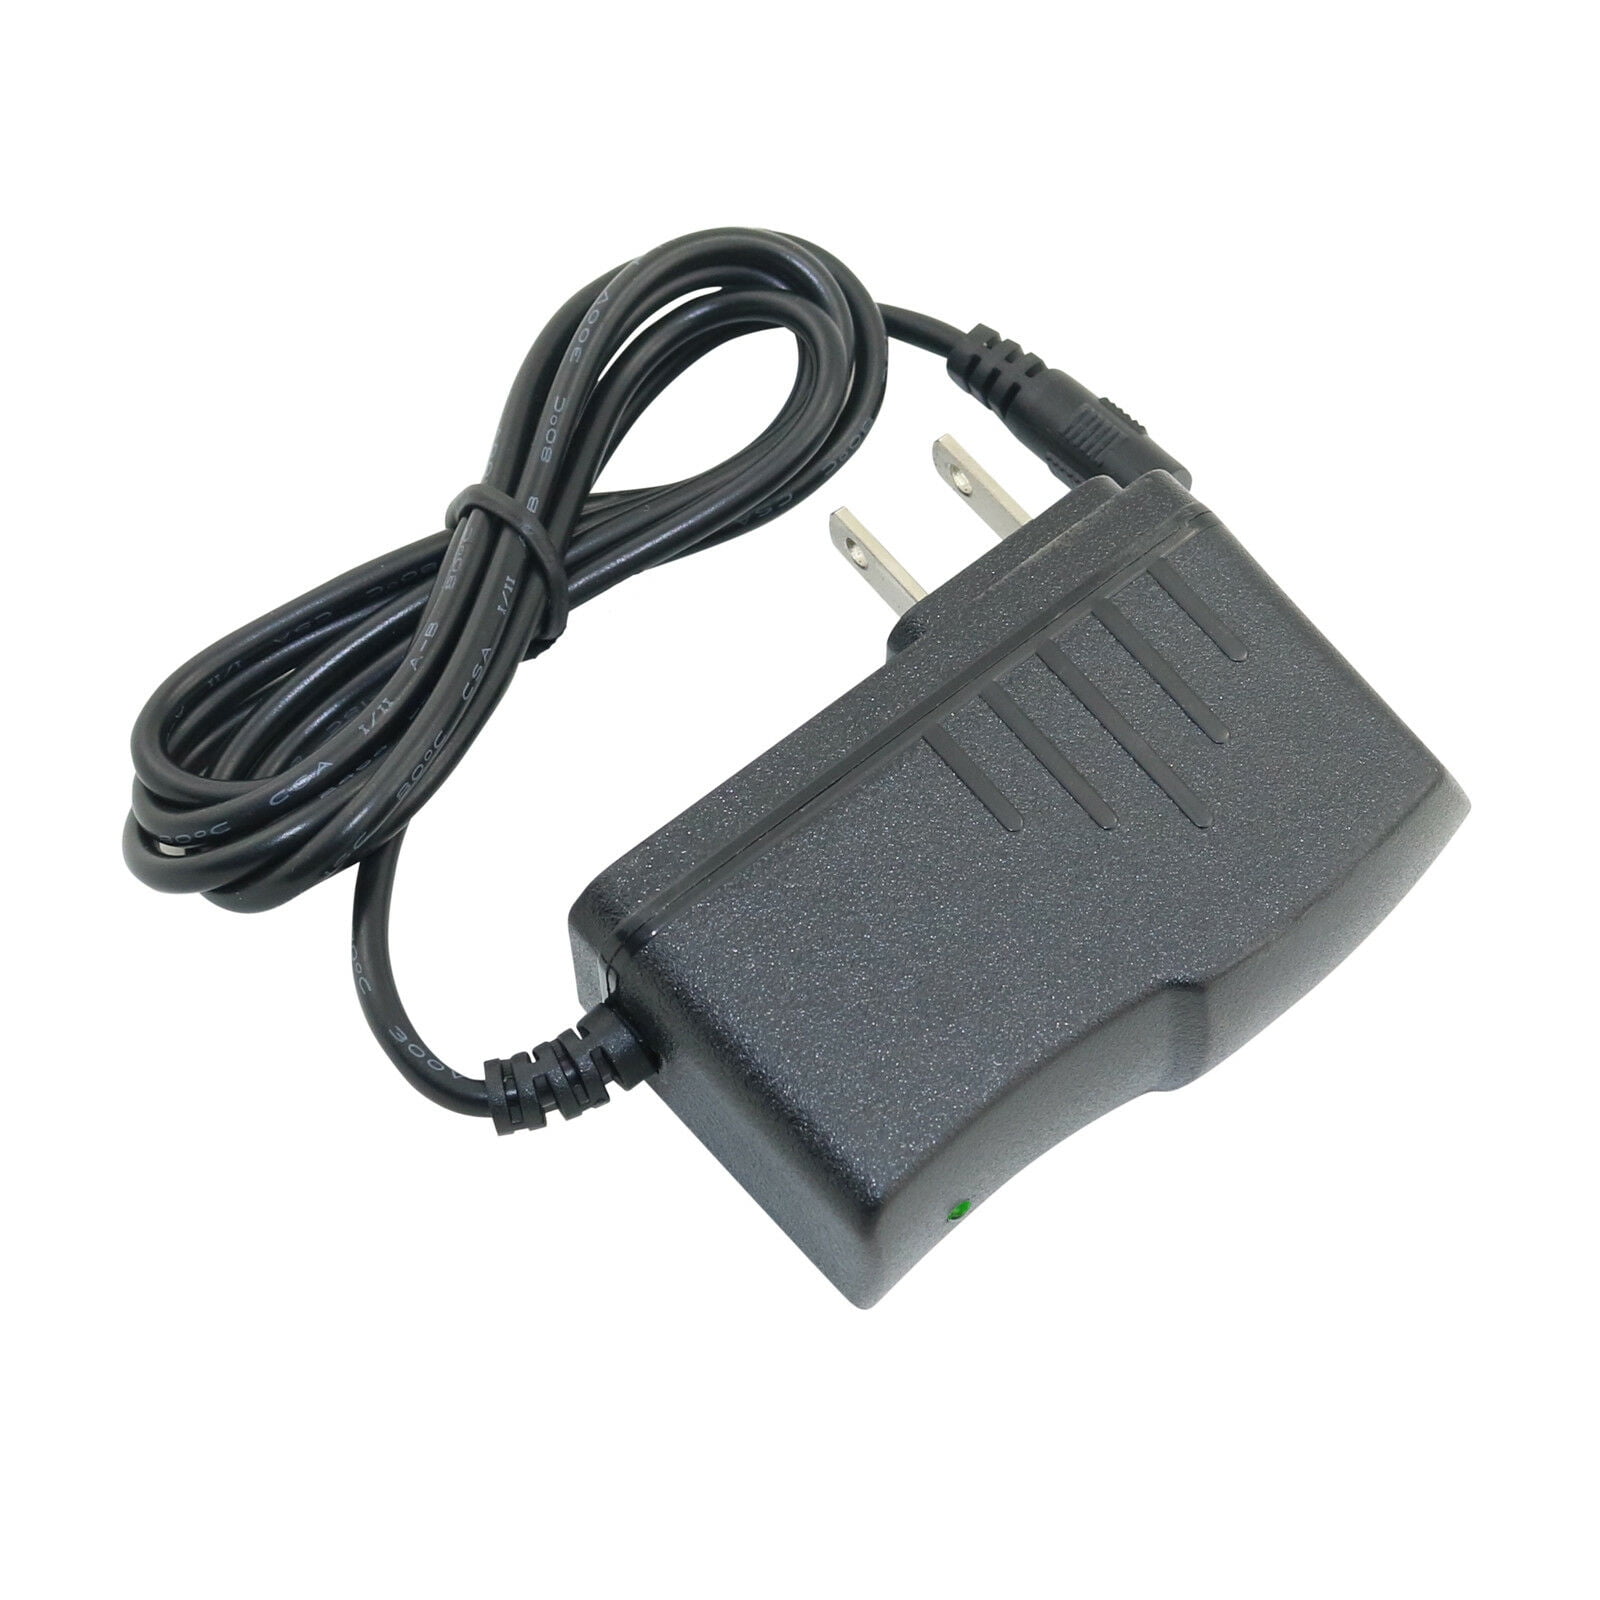 AC Adapter Charger DC Power Cord For LA-520 Mains 10.1 Google Android Tablet PC 